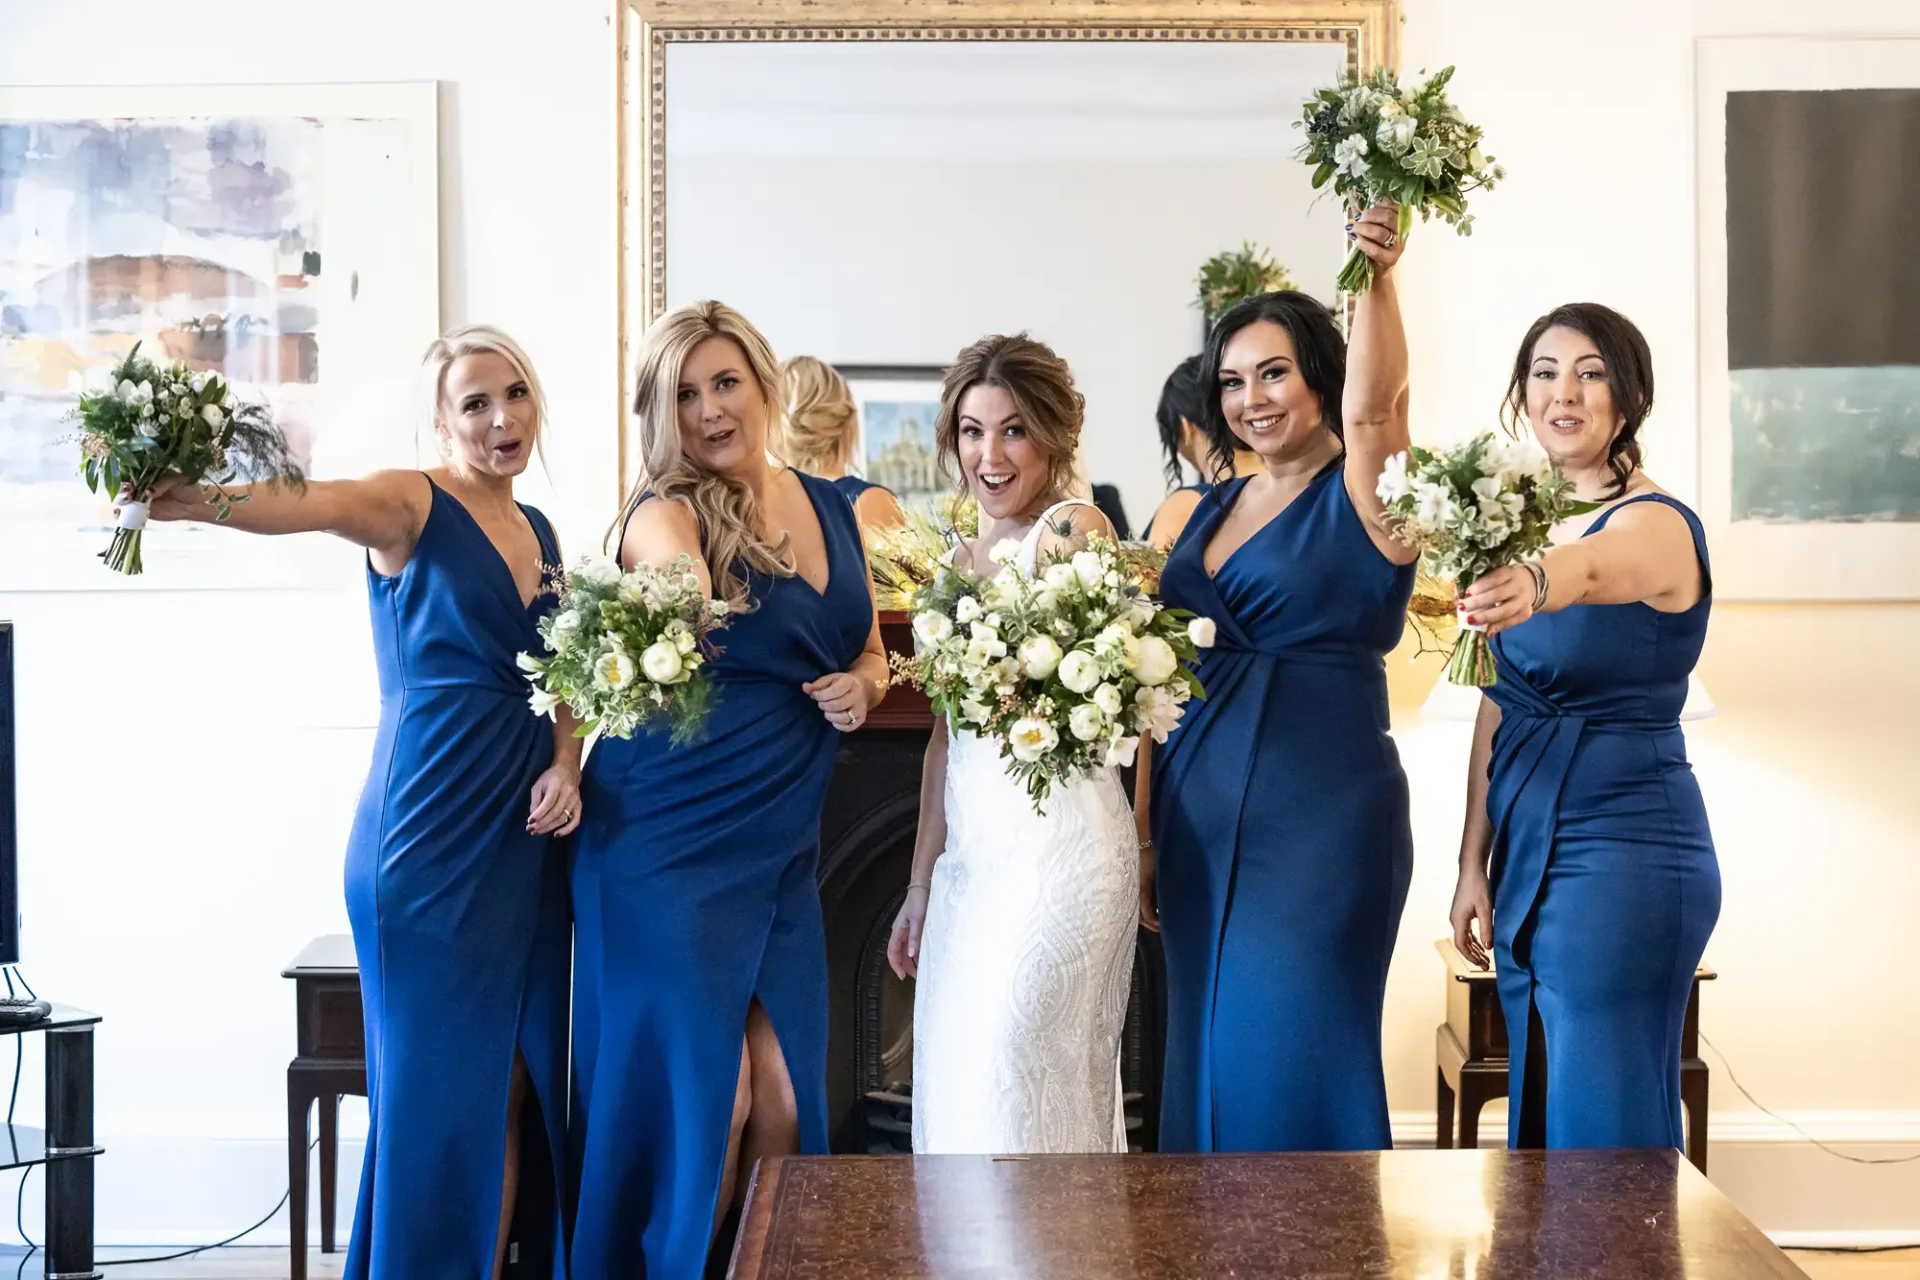 Bride with four bridesmaids in blue dresses, holding bouquets and posing excitedly in an elegantly decorated room.